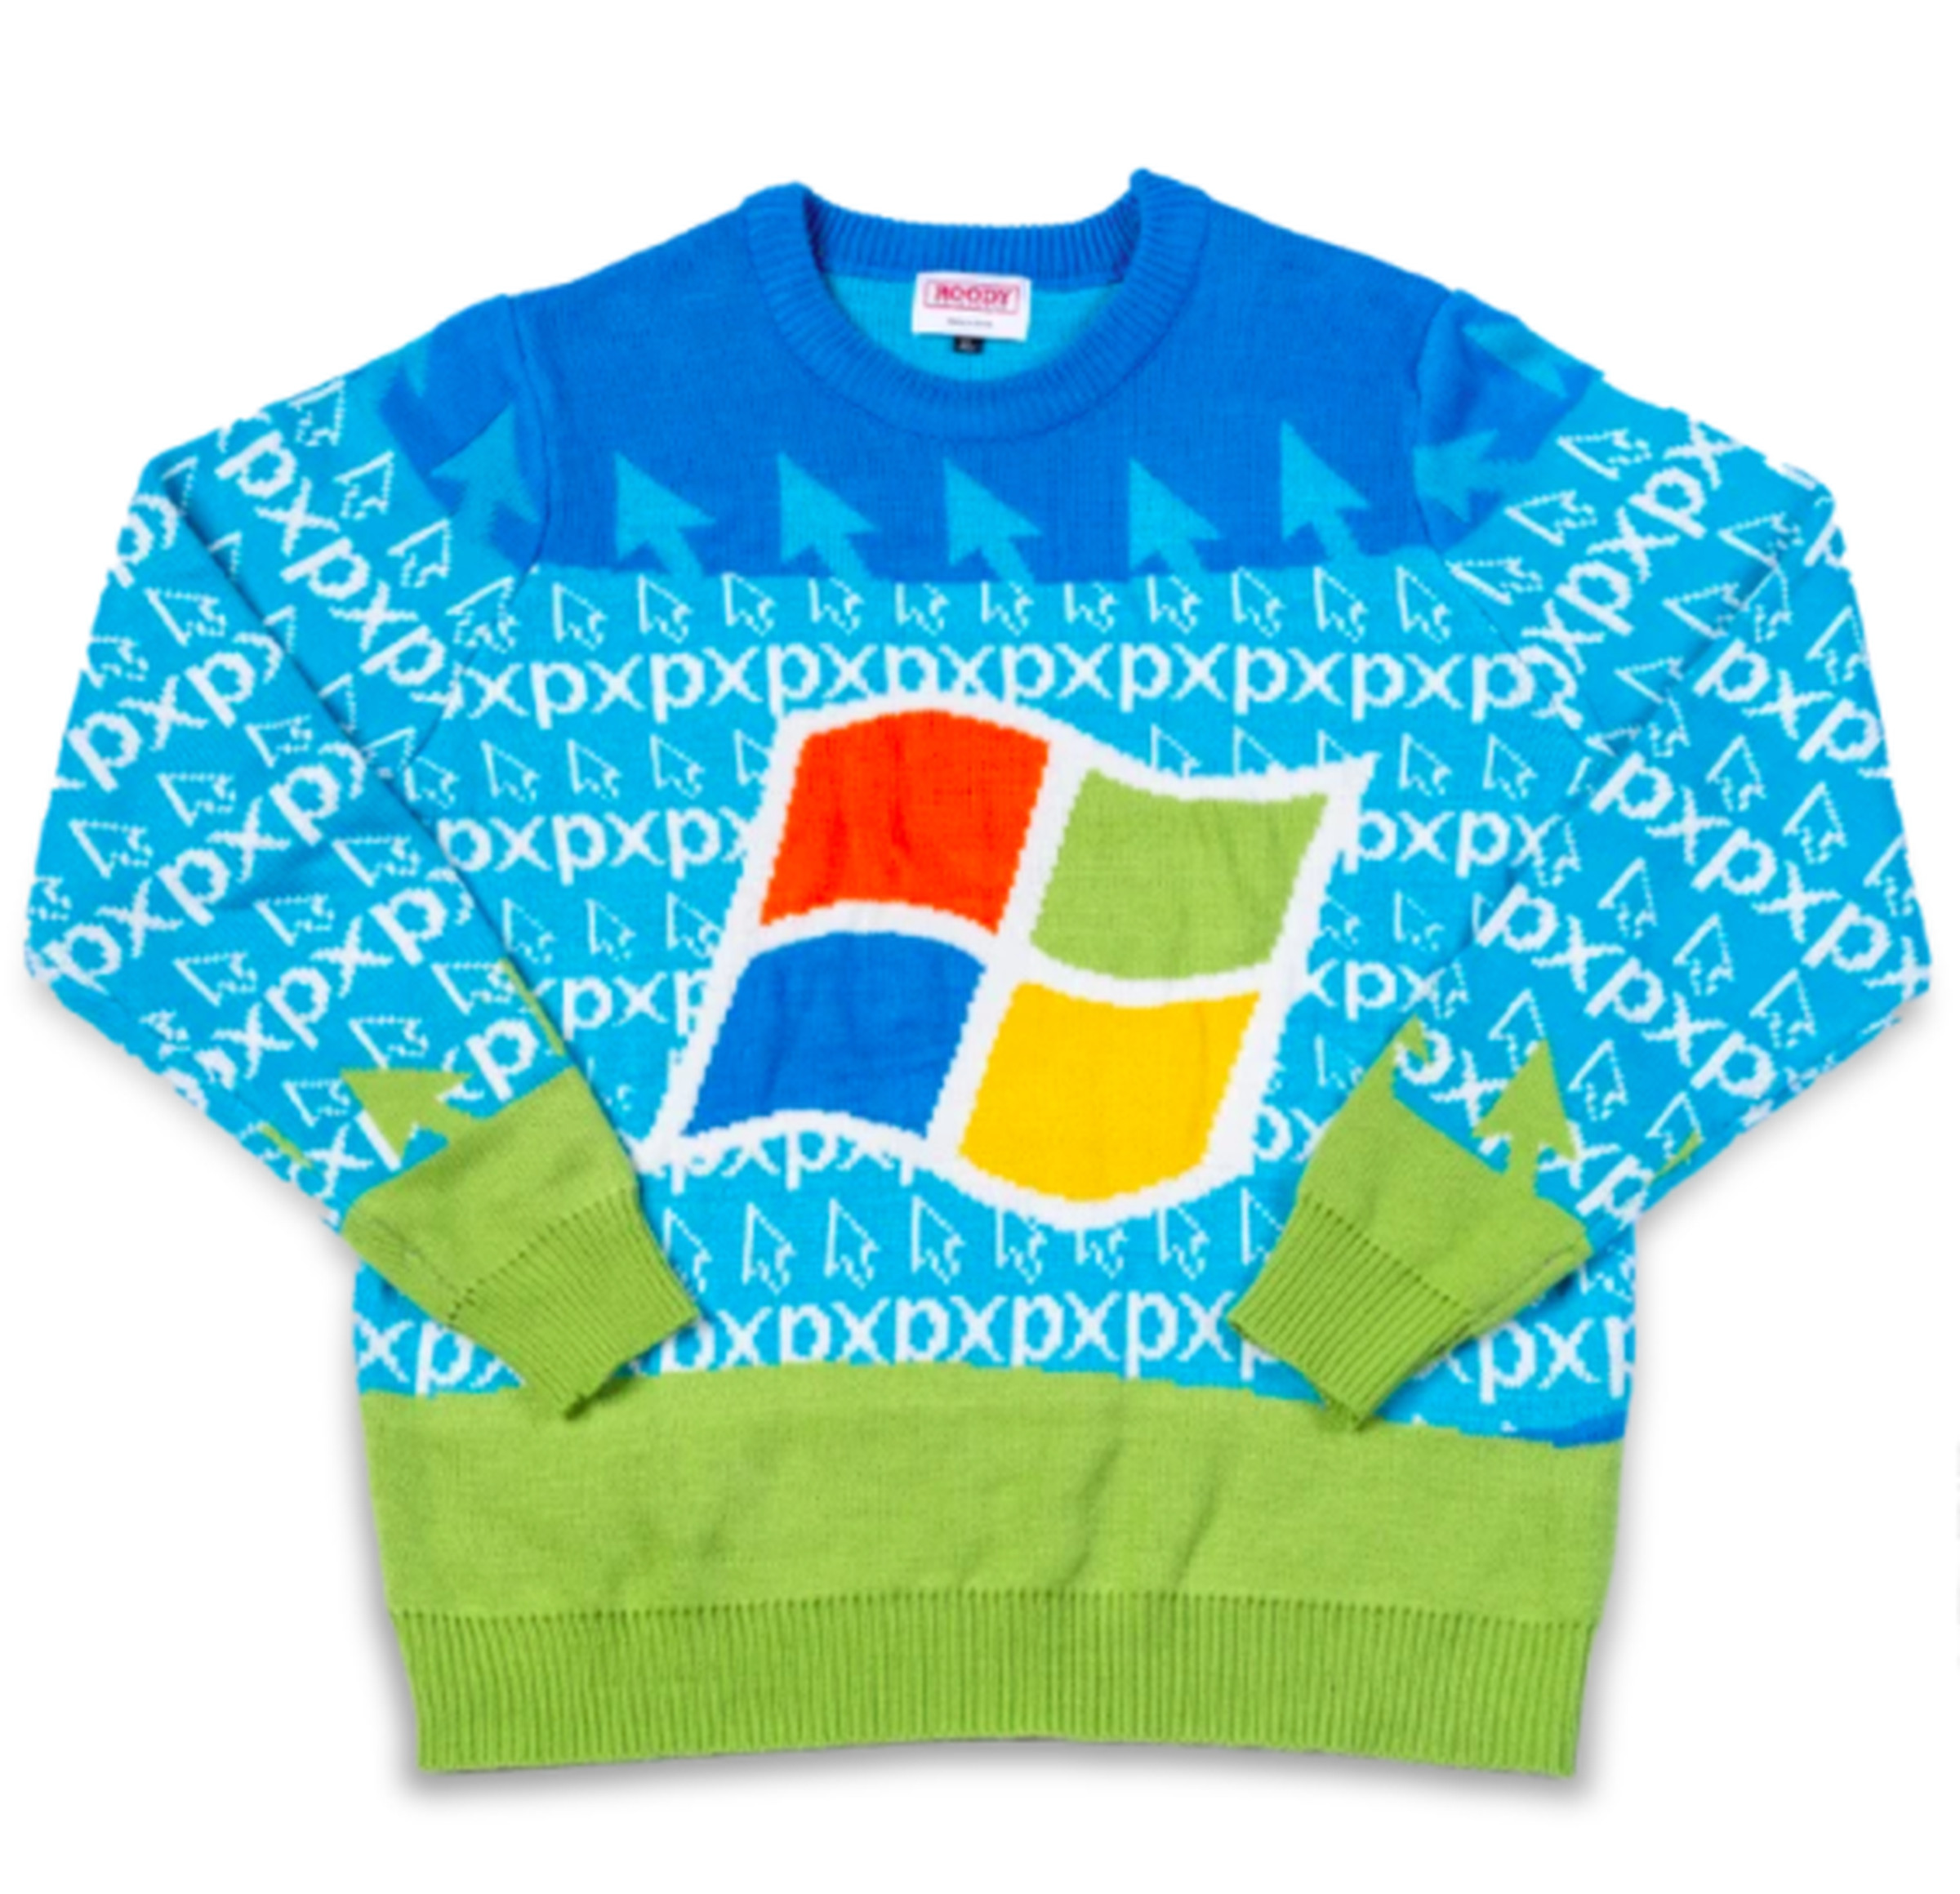 <em>The Windows 95 Ugly Sweater prominently features the redesigned Windows logo the operating system launched with.</em>